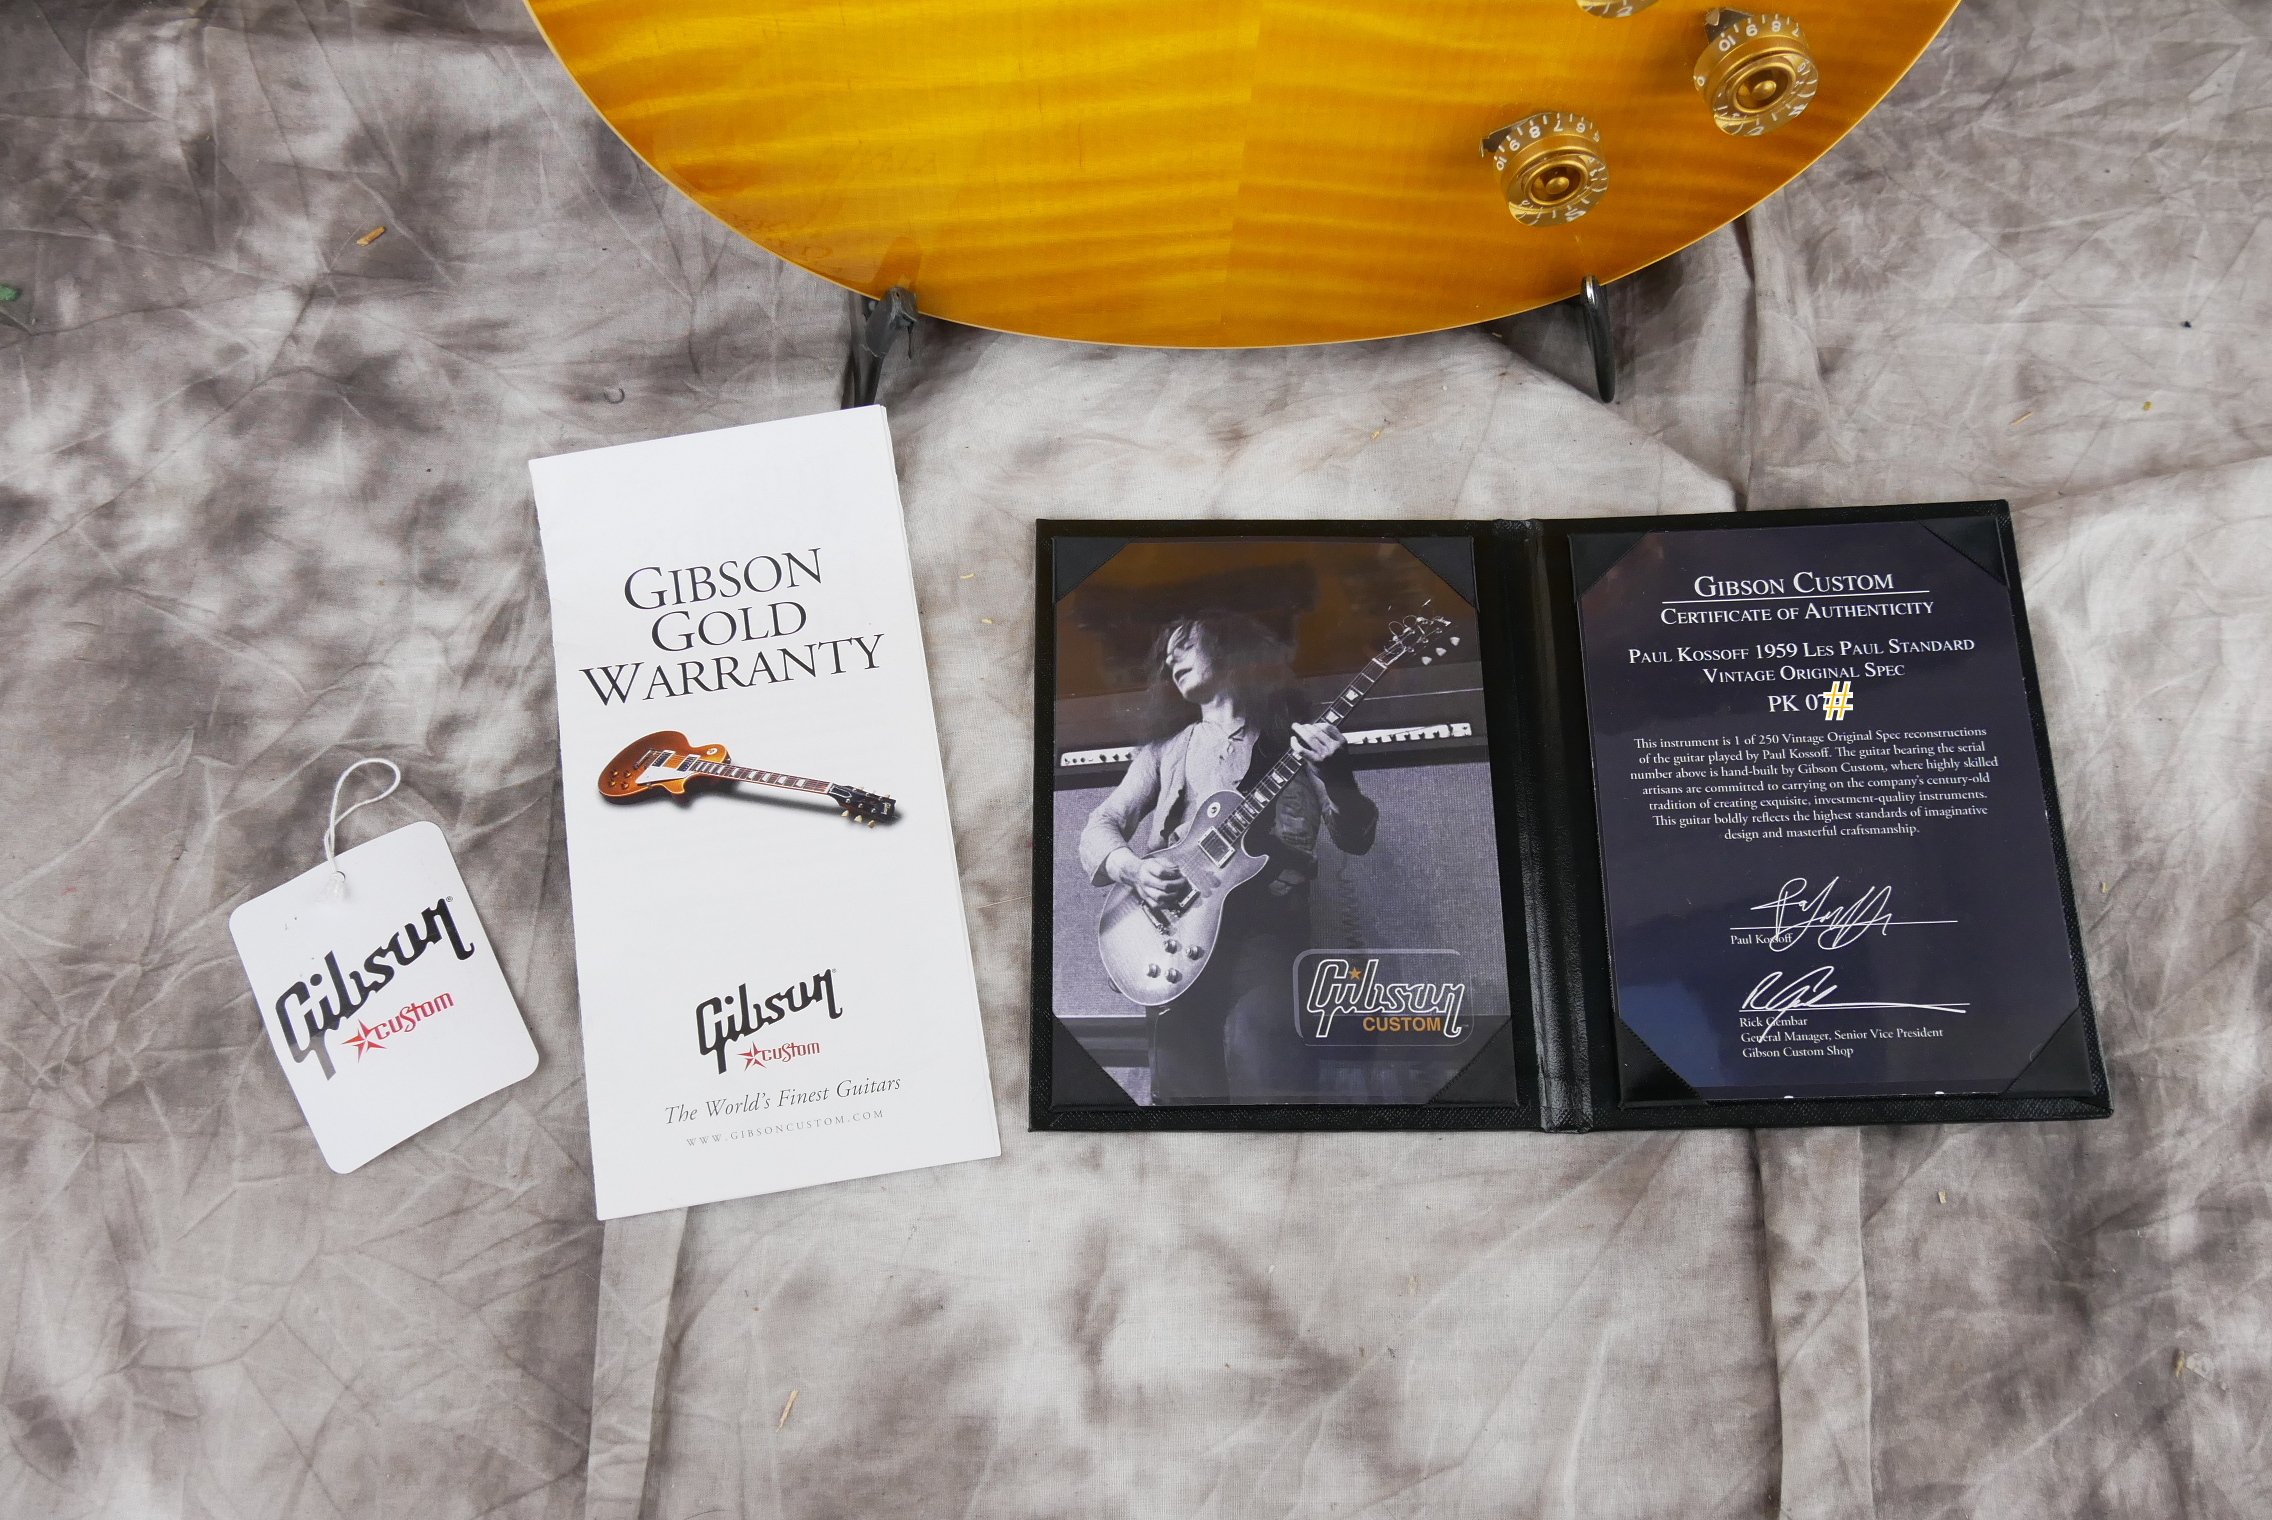 Gibson-Les-Paul-Kossoff-VOS-limited-edition-2012-019.JPG